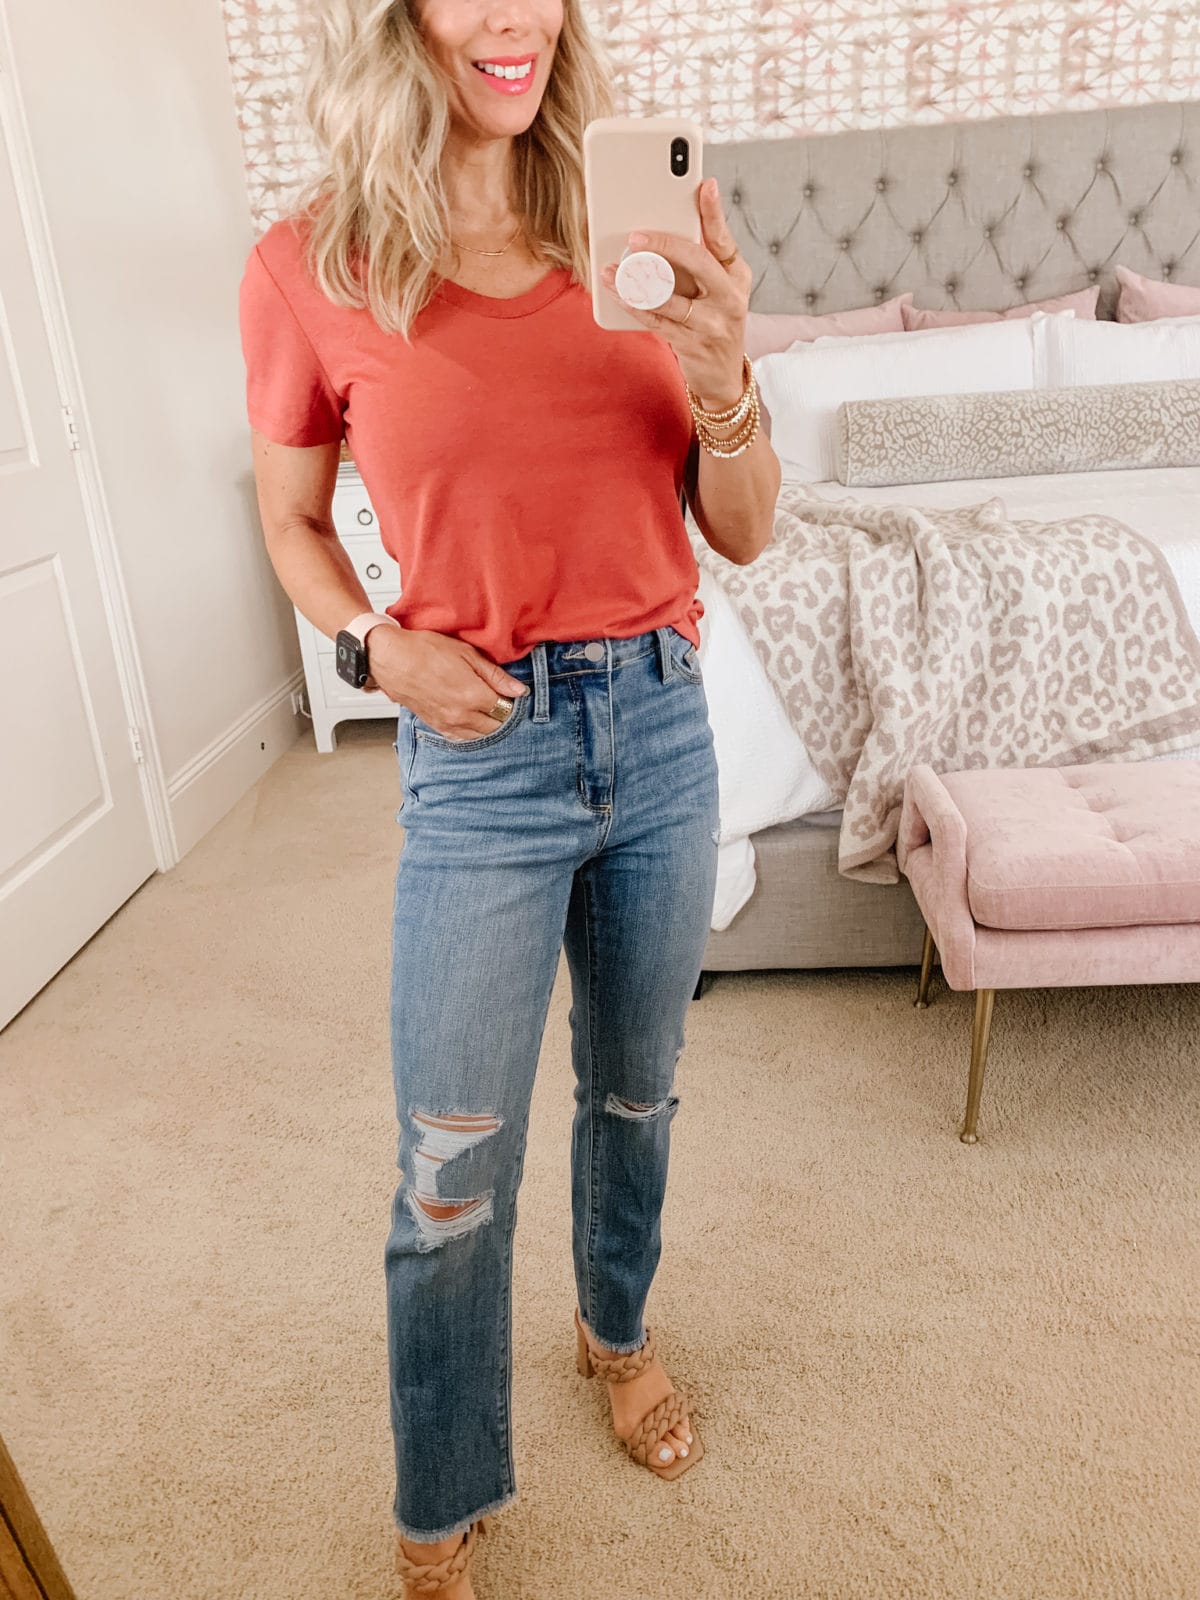 Target Fashion, V Neck Tee and Distressed Jeans and Sandals 